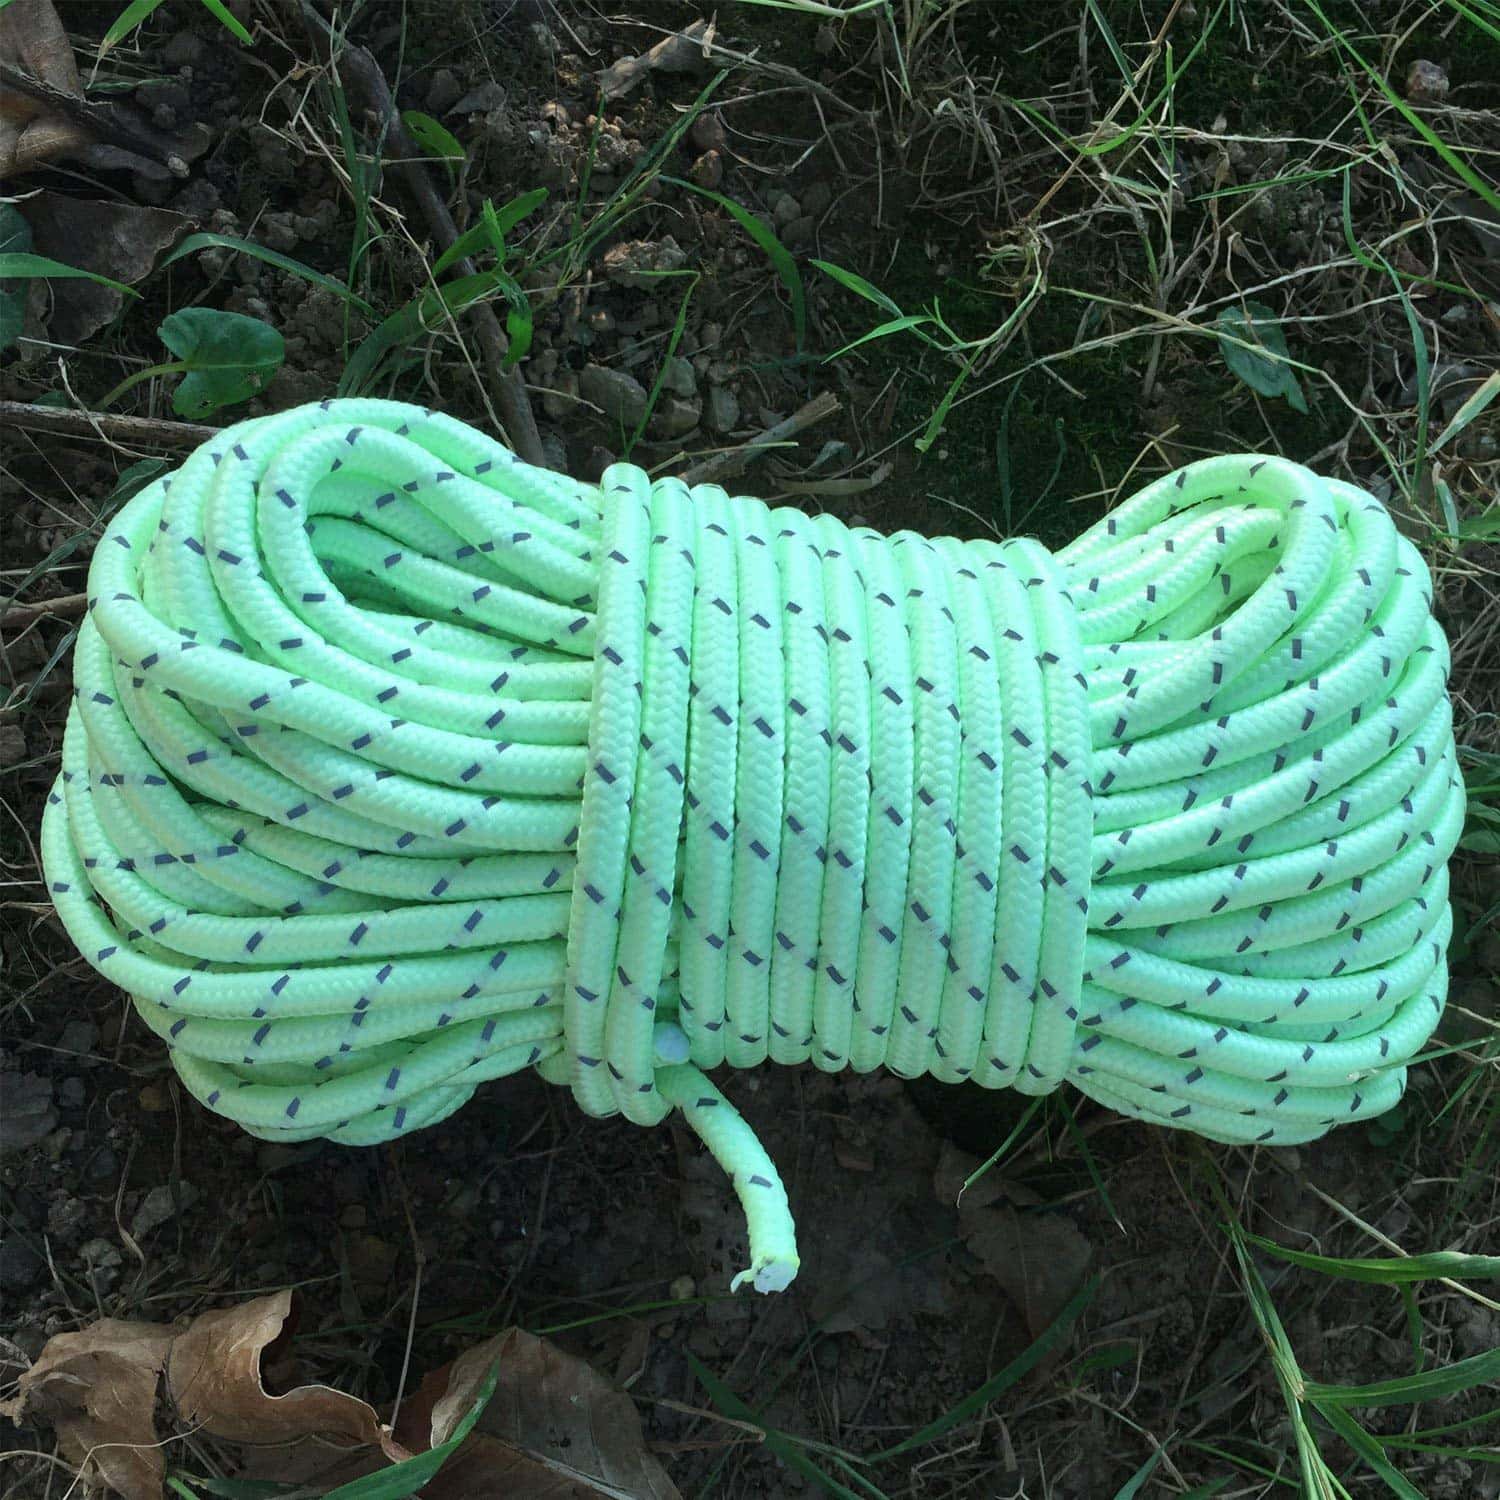 Glow-In-The-Dark Rope Now Exist And It's Perfect For 'Glamping